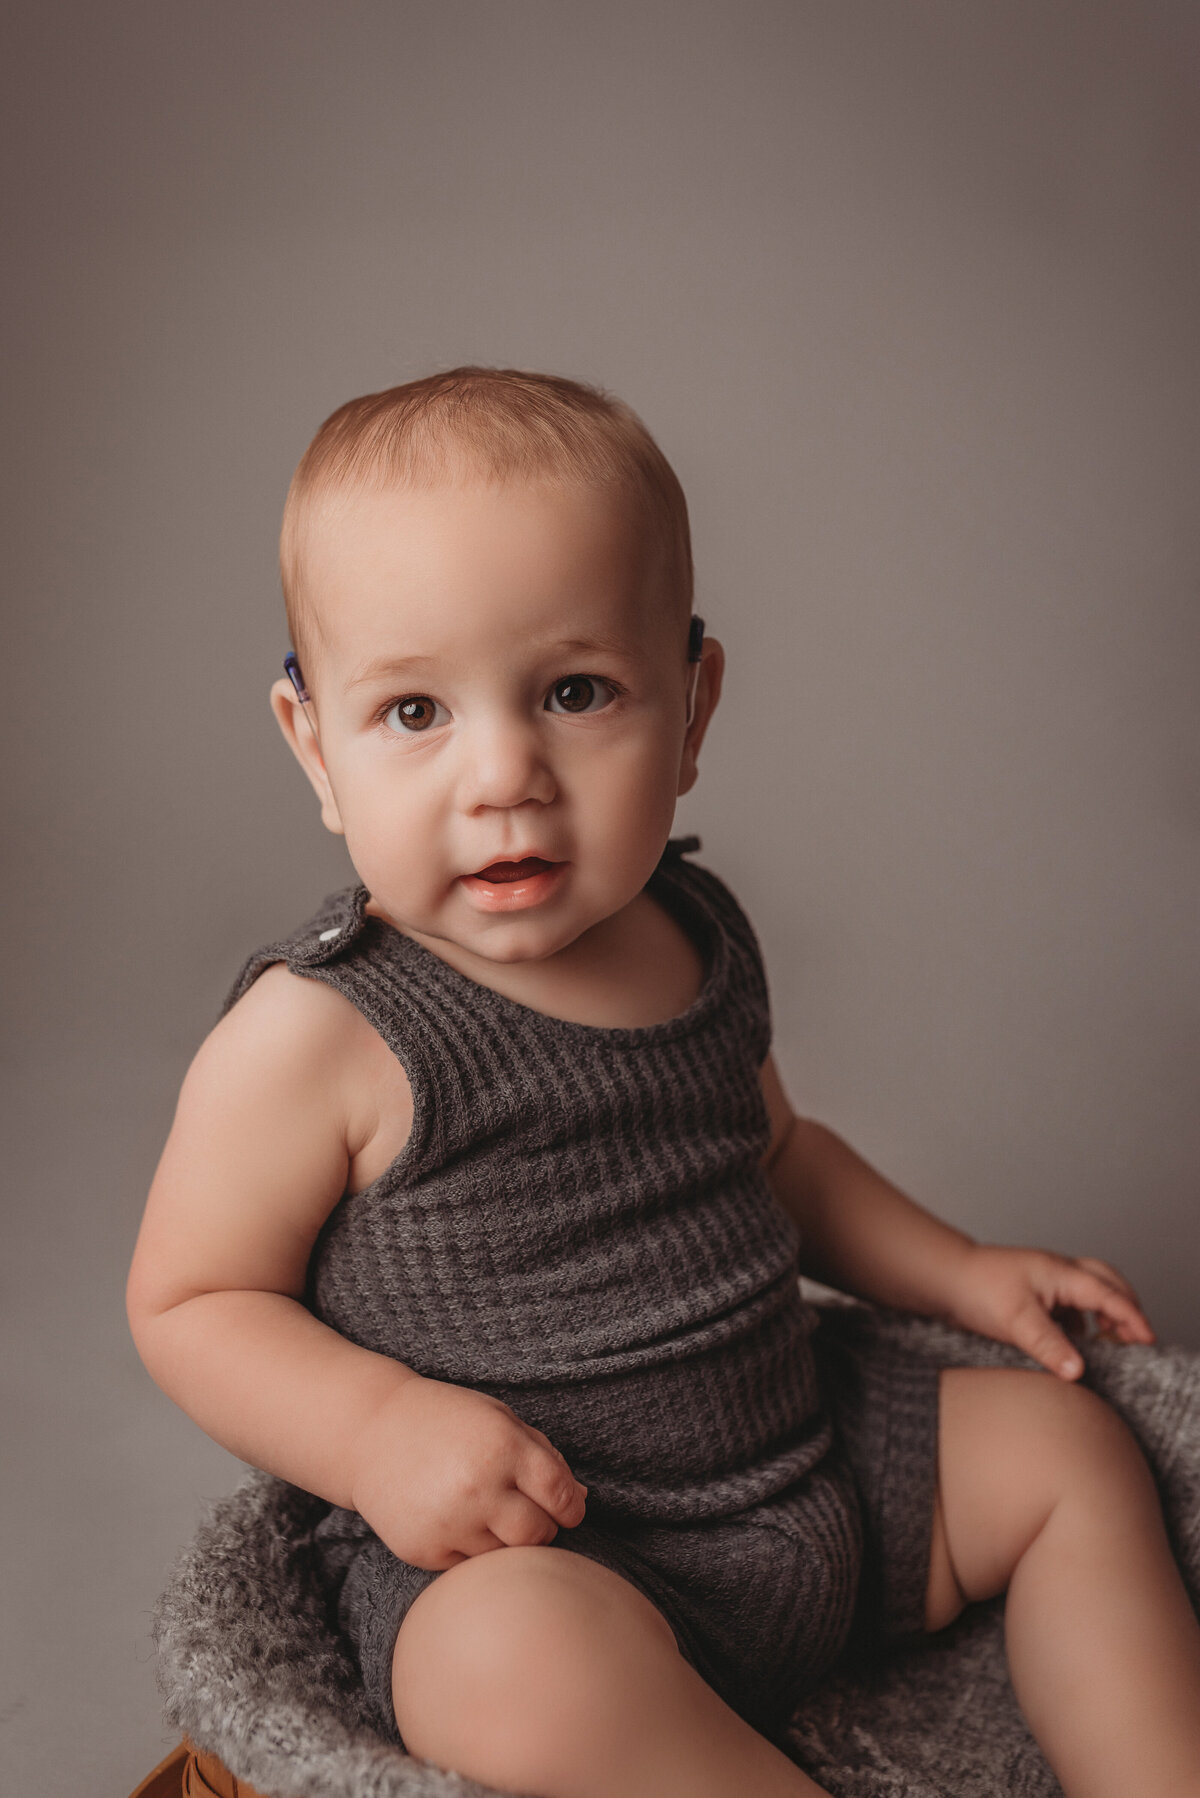 One year old baby boy wearing gray waffle knit romper sitting in basket posing for his portraits on a light gray backdrop